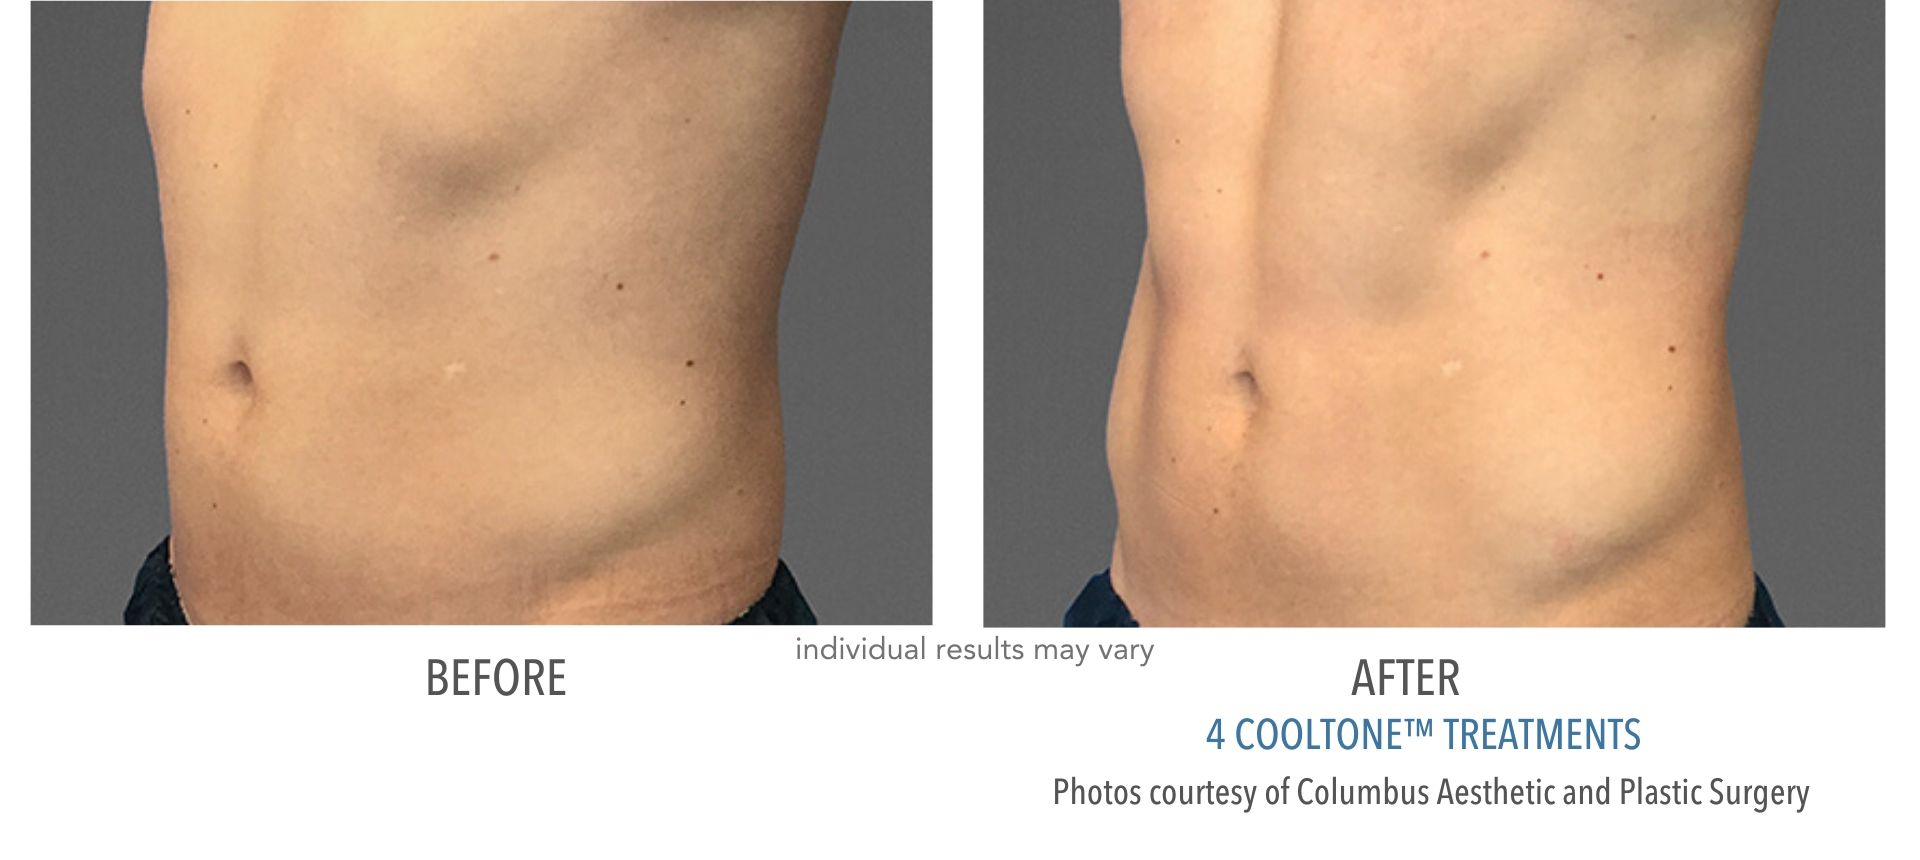 Before and after CoolTone™ results